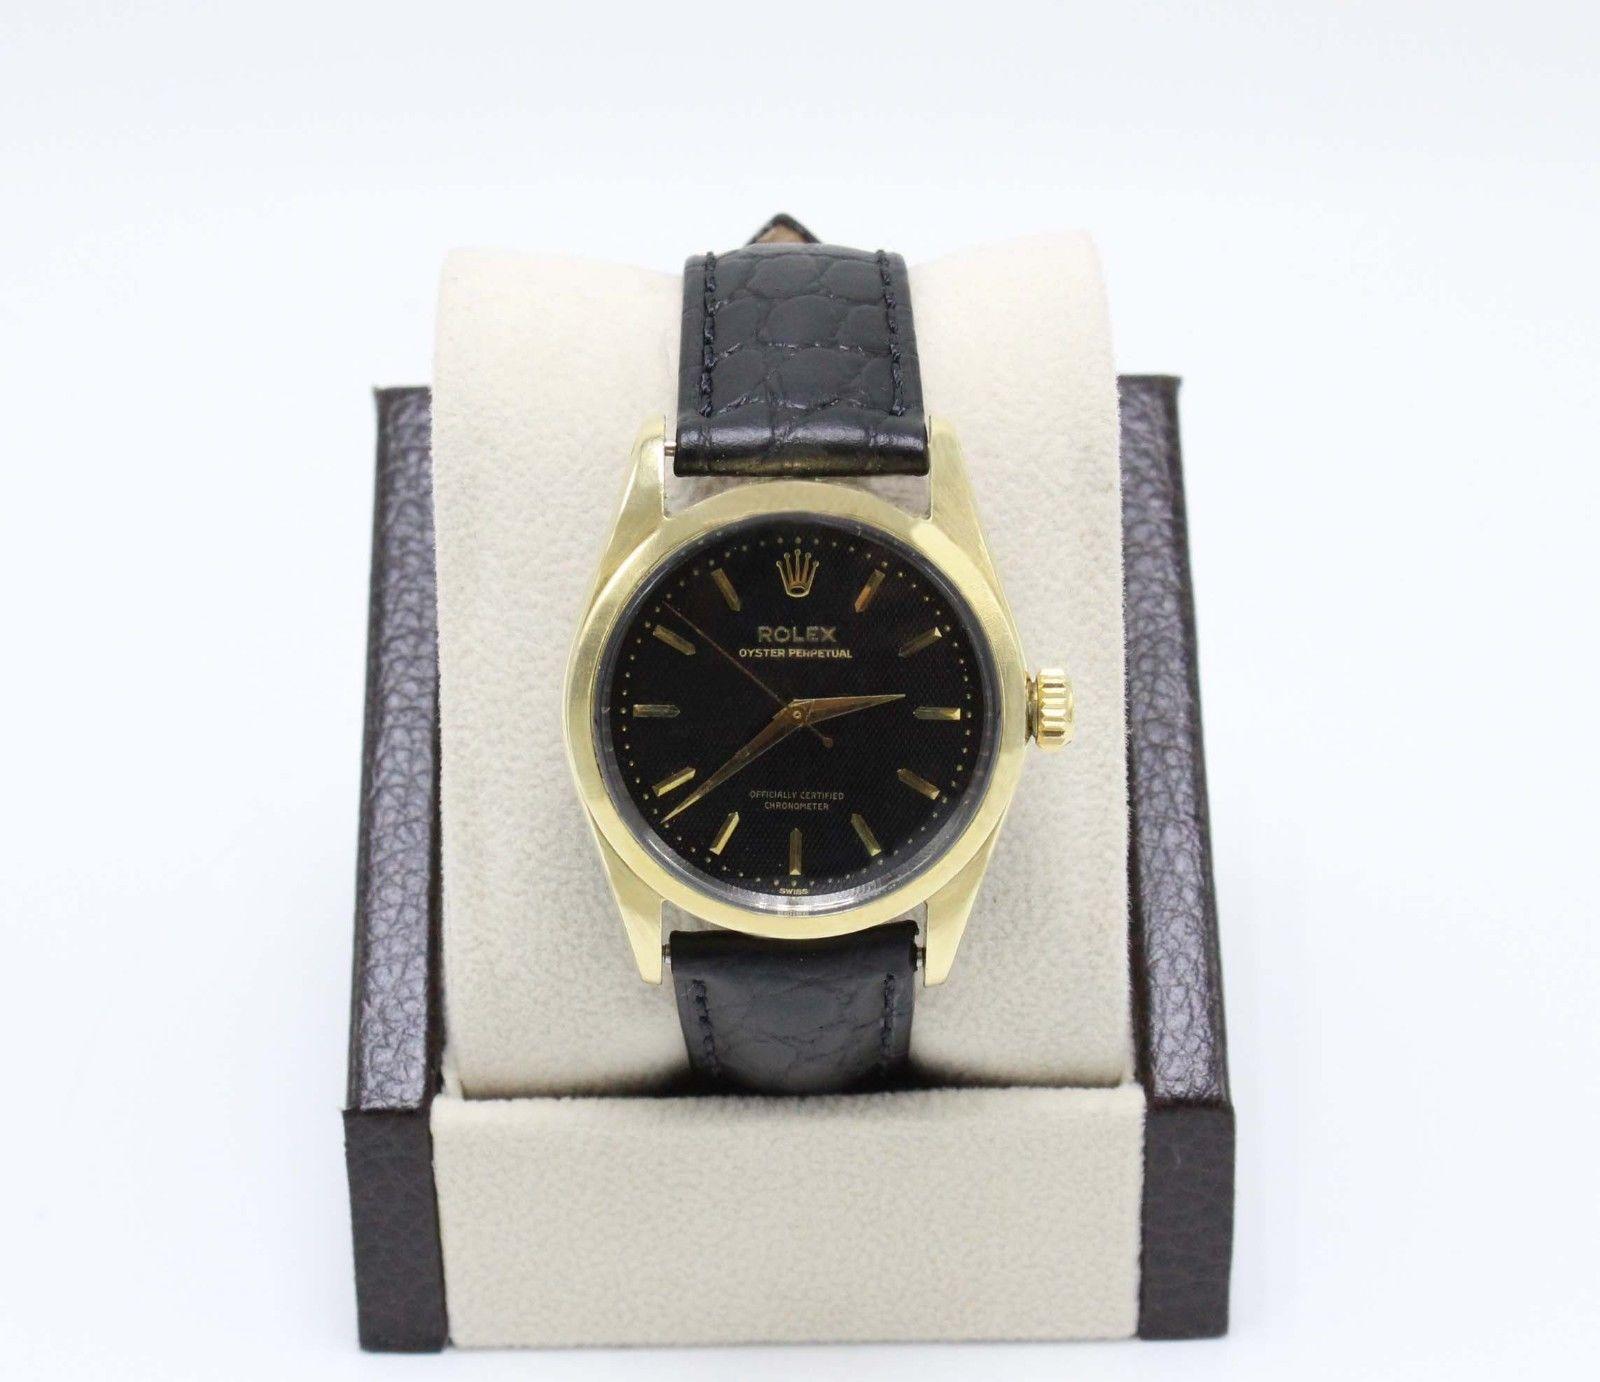 Style Number: 6634

Serial: 242***   1942

Model: Oyster Perpetual

Case Material: 14K Yellow Gold over Stainless Steel

Band: Black Leather

Bezel: 14K Yellow Gold over Stainless Steel 

Dial: Black

Face: Acrylic

Case Size: 34mm

Includes: